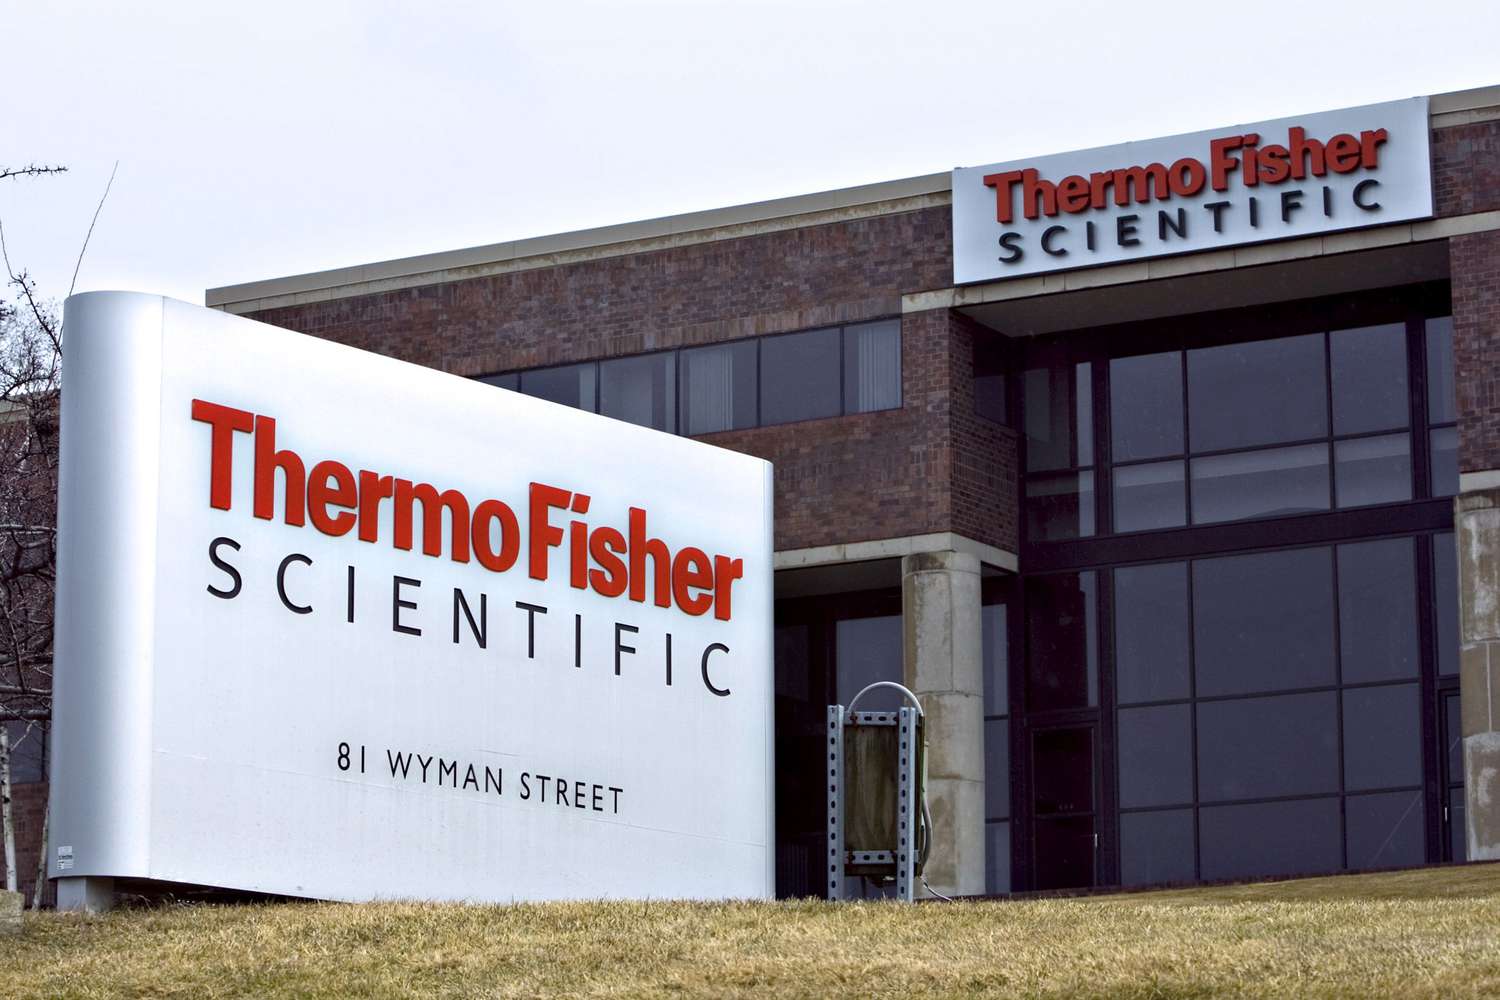 Thermo Fisher Q2 Earnings Beat Estimates, Guidance Lifted [Video]